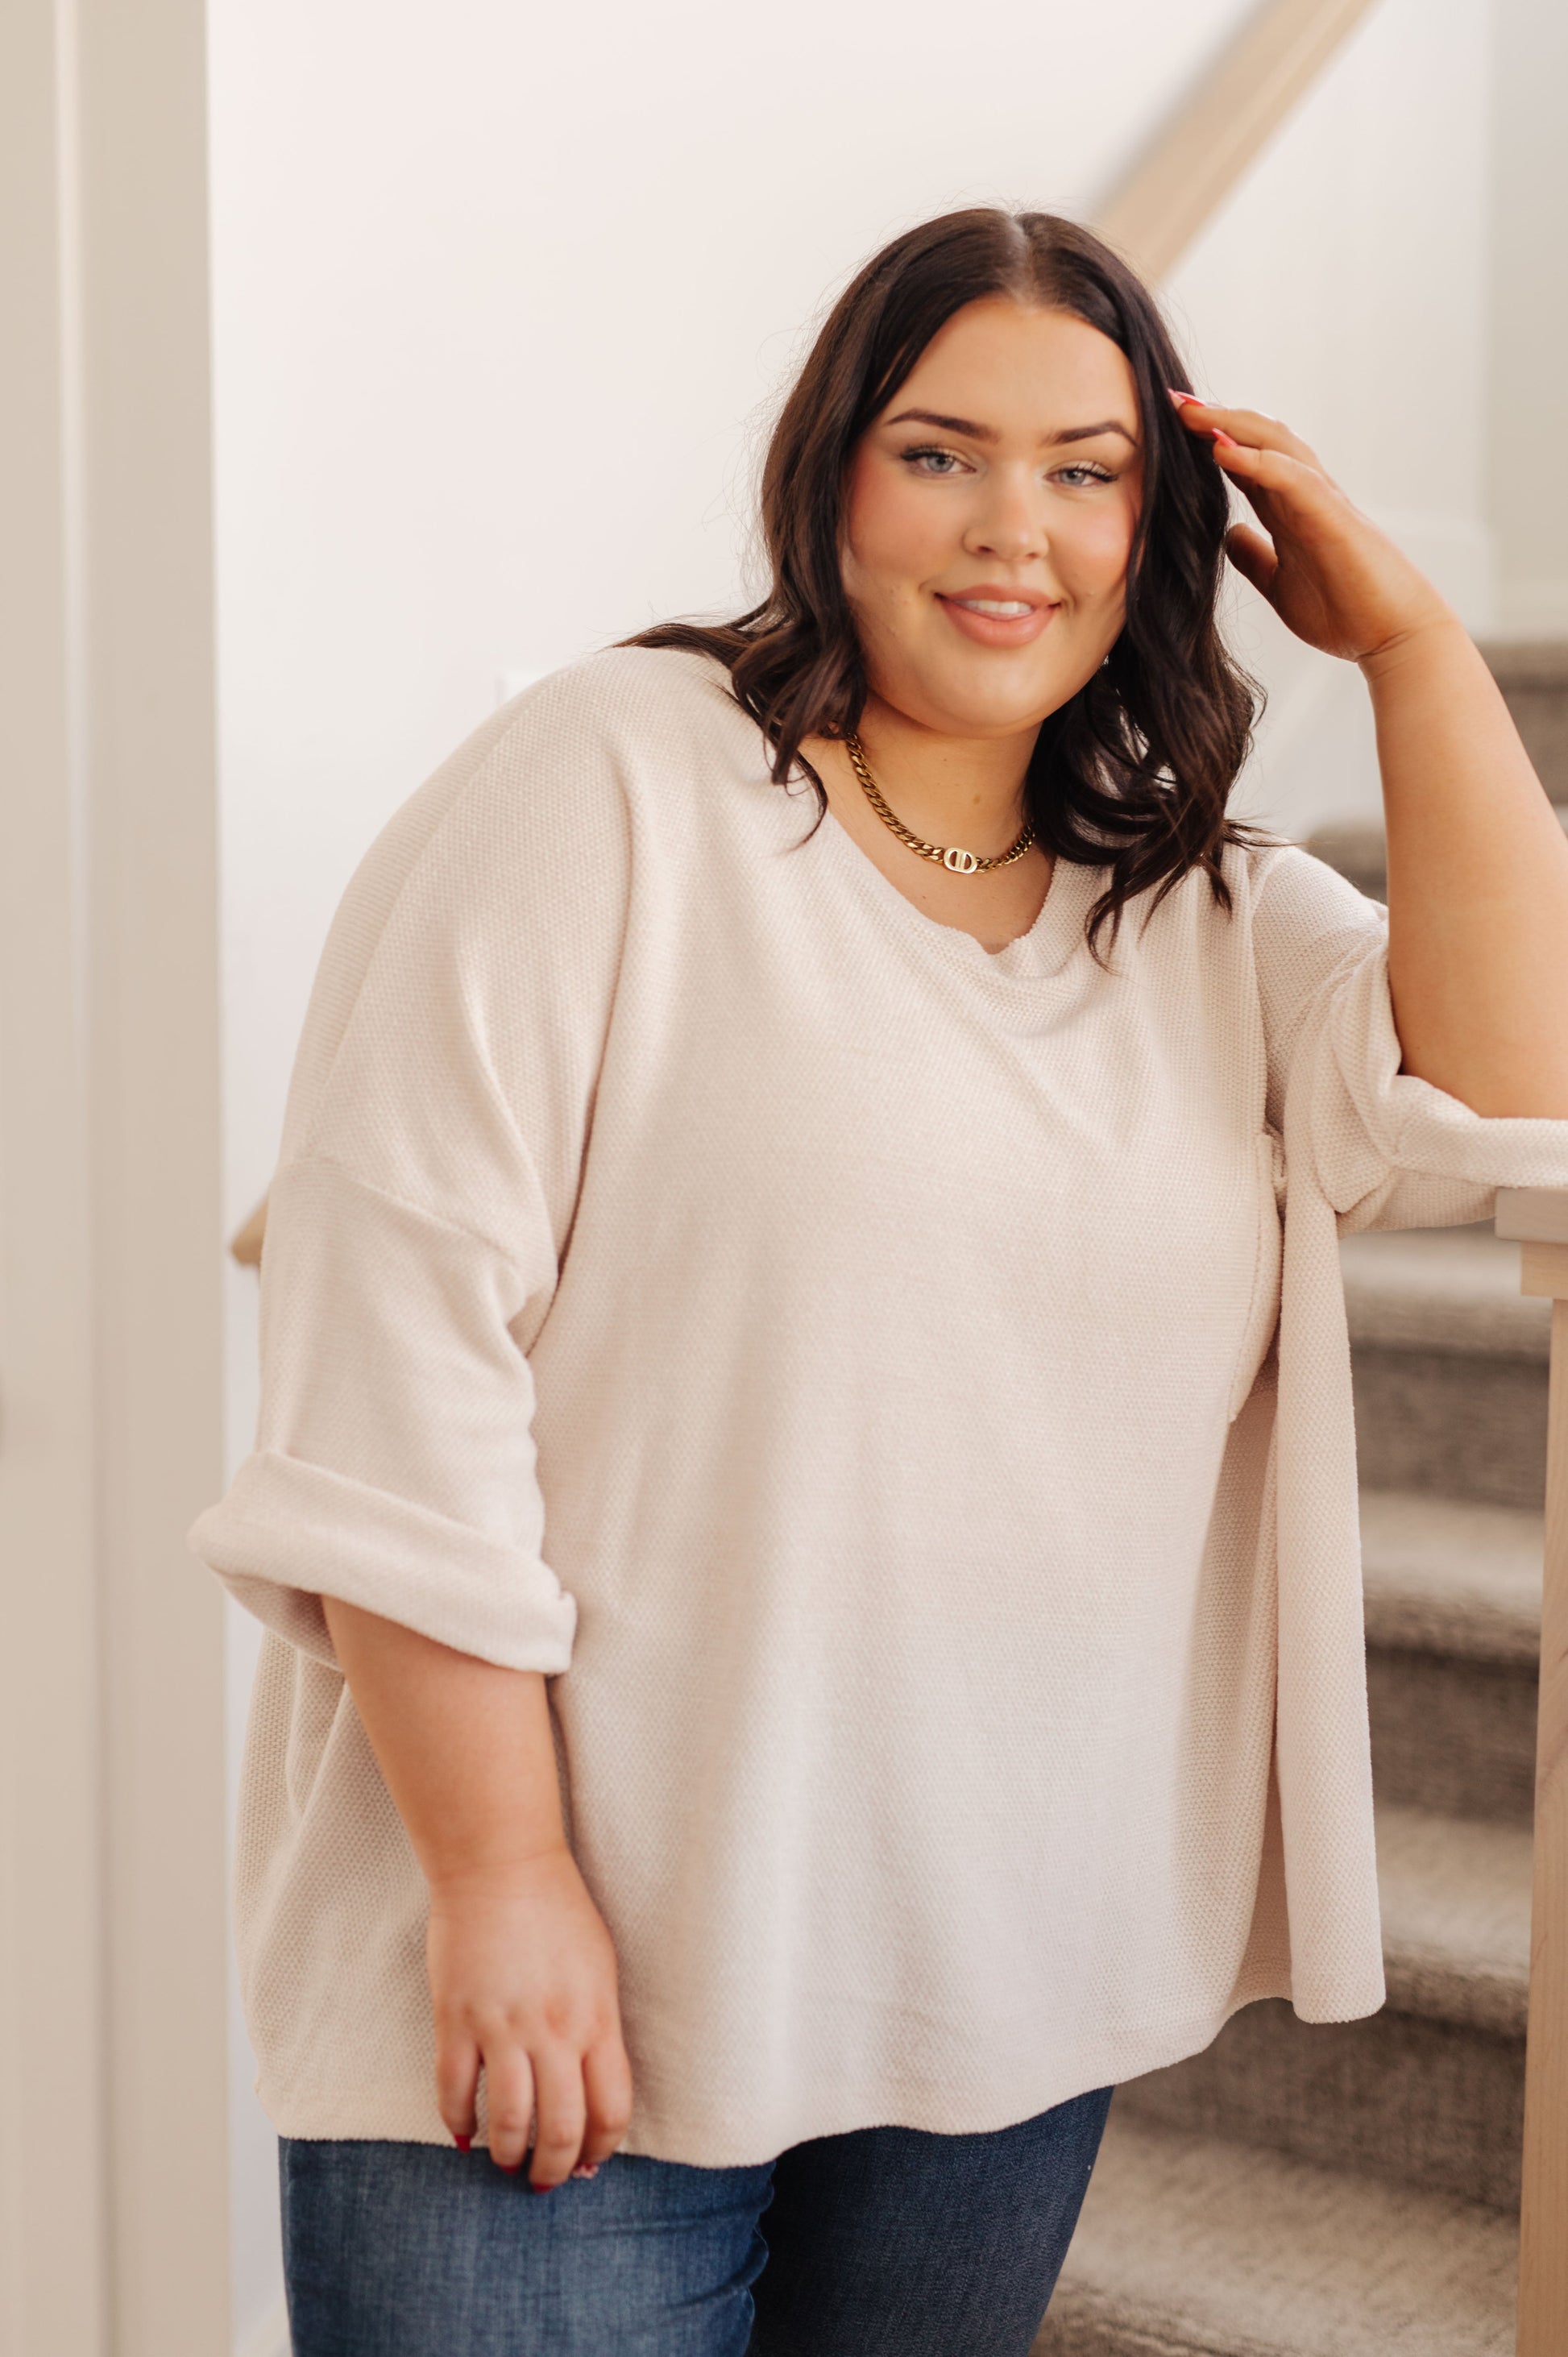 Wrap yourself in comfort with the Ivory Thoughts Chenille Blouse. Featuring a cozy chenille knit, dropped shoulder, cuffed sleeve, boxy fit and patch pocket, this blouse is perfect for a casual yet chic look. Enjoy your day in the soft, stylish style of the Ivory Thoughts Blouse. S - 3X